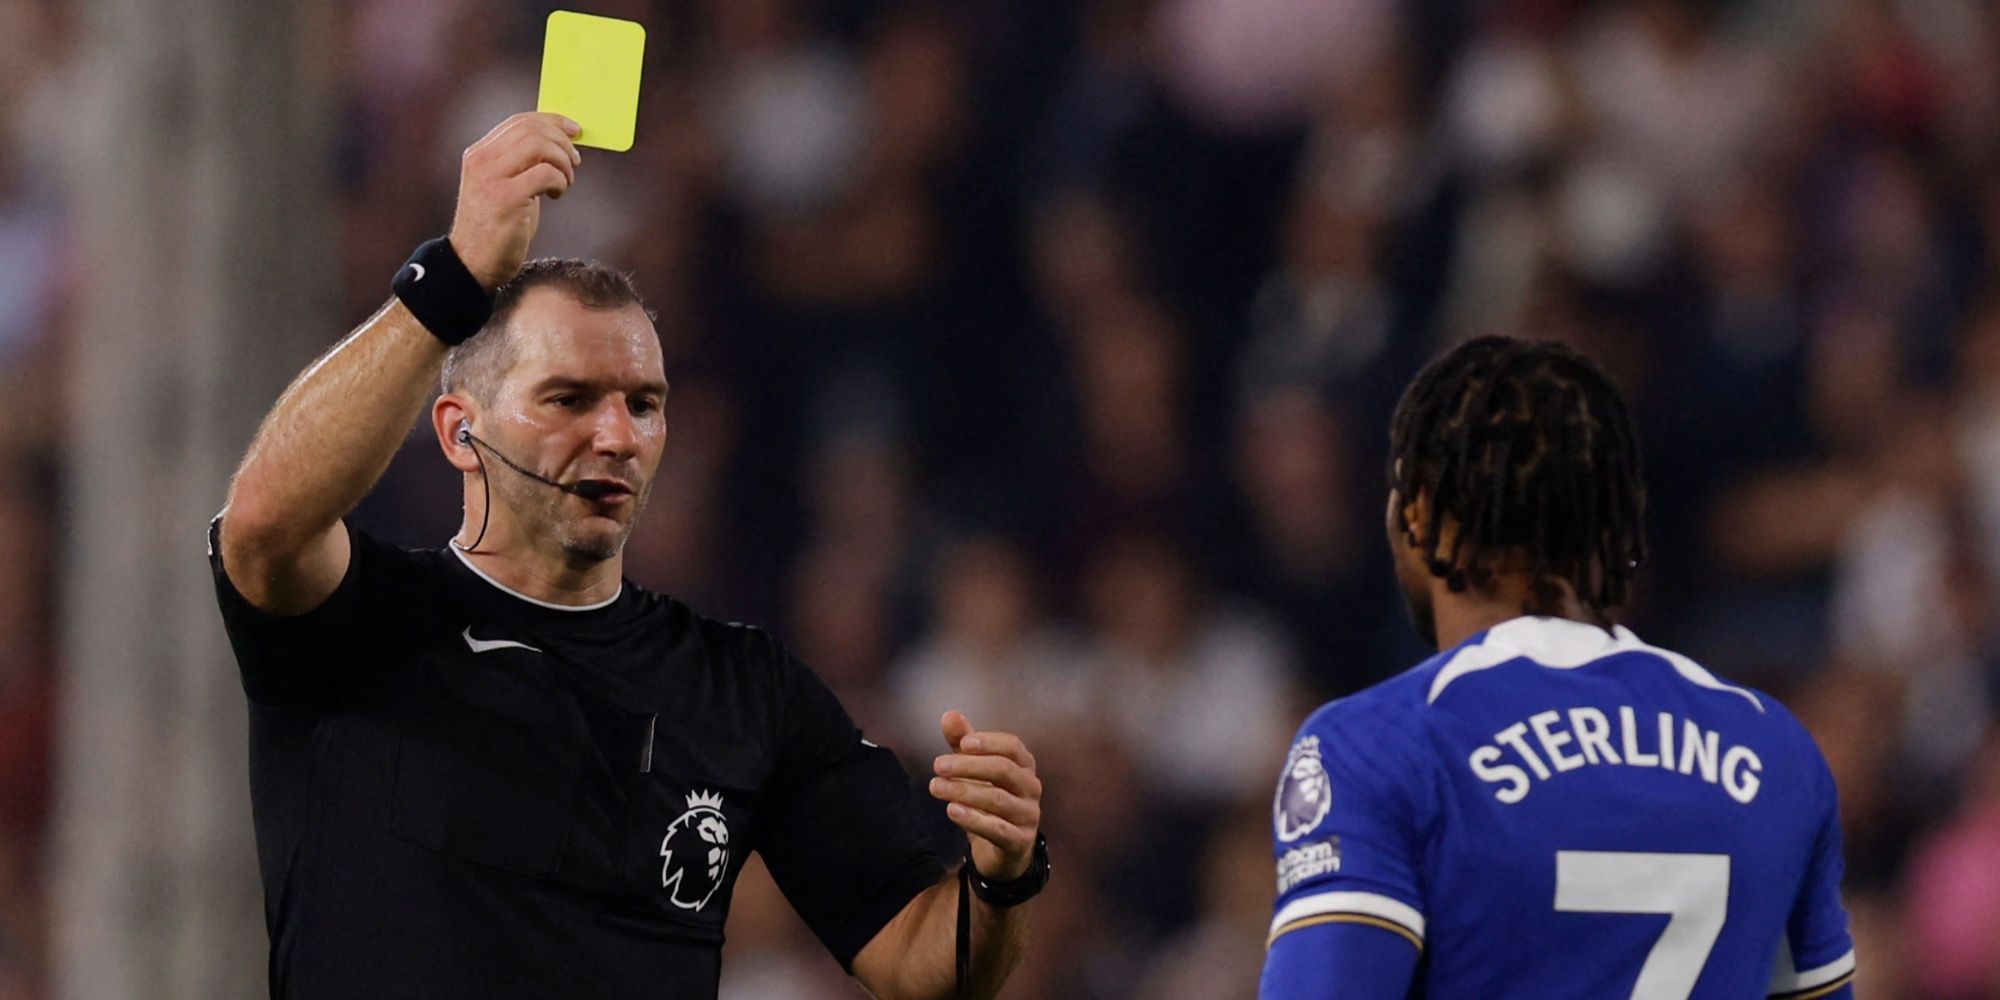 Chelsea's Raheem Sterling is shown a yellow card